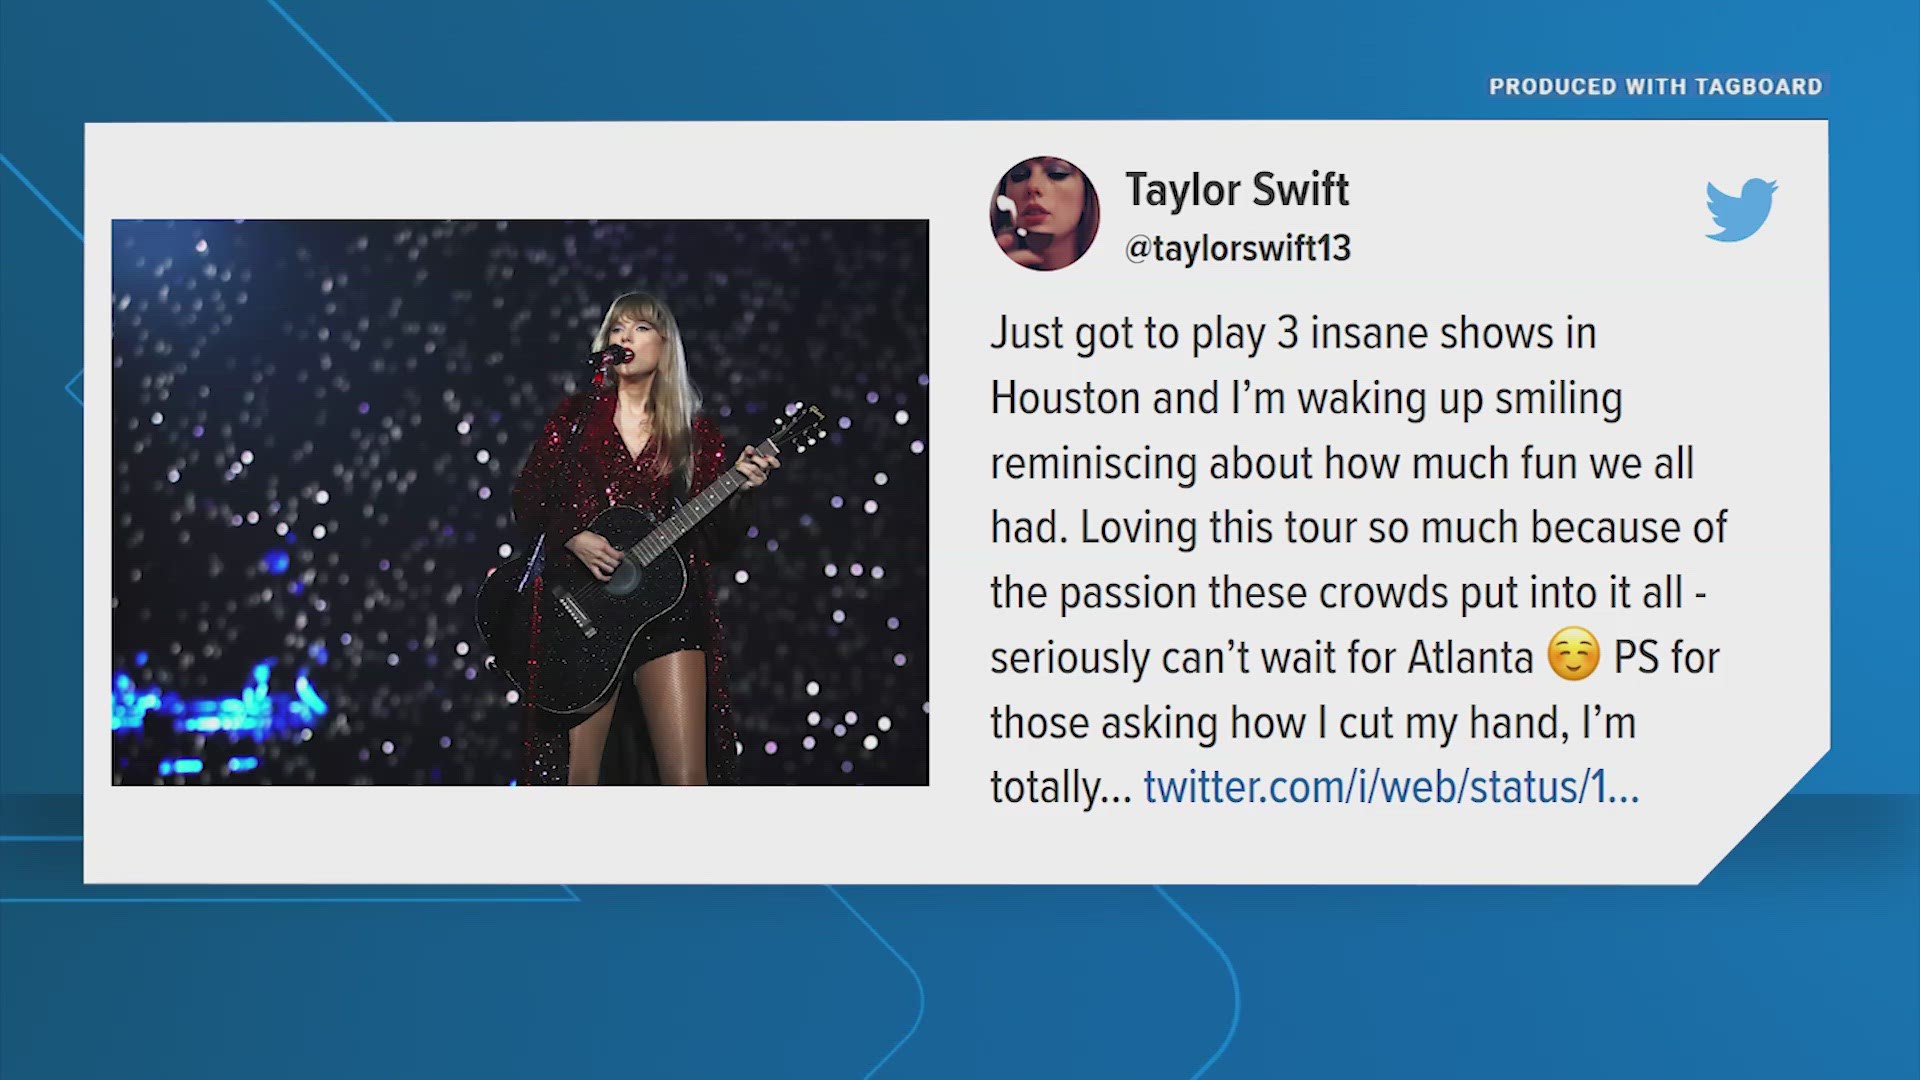 For a moment, Taylor Swift was seen performing in Houston with a large gash in her hand. She said she fell backstage and she is doing just fine.